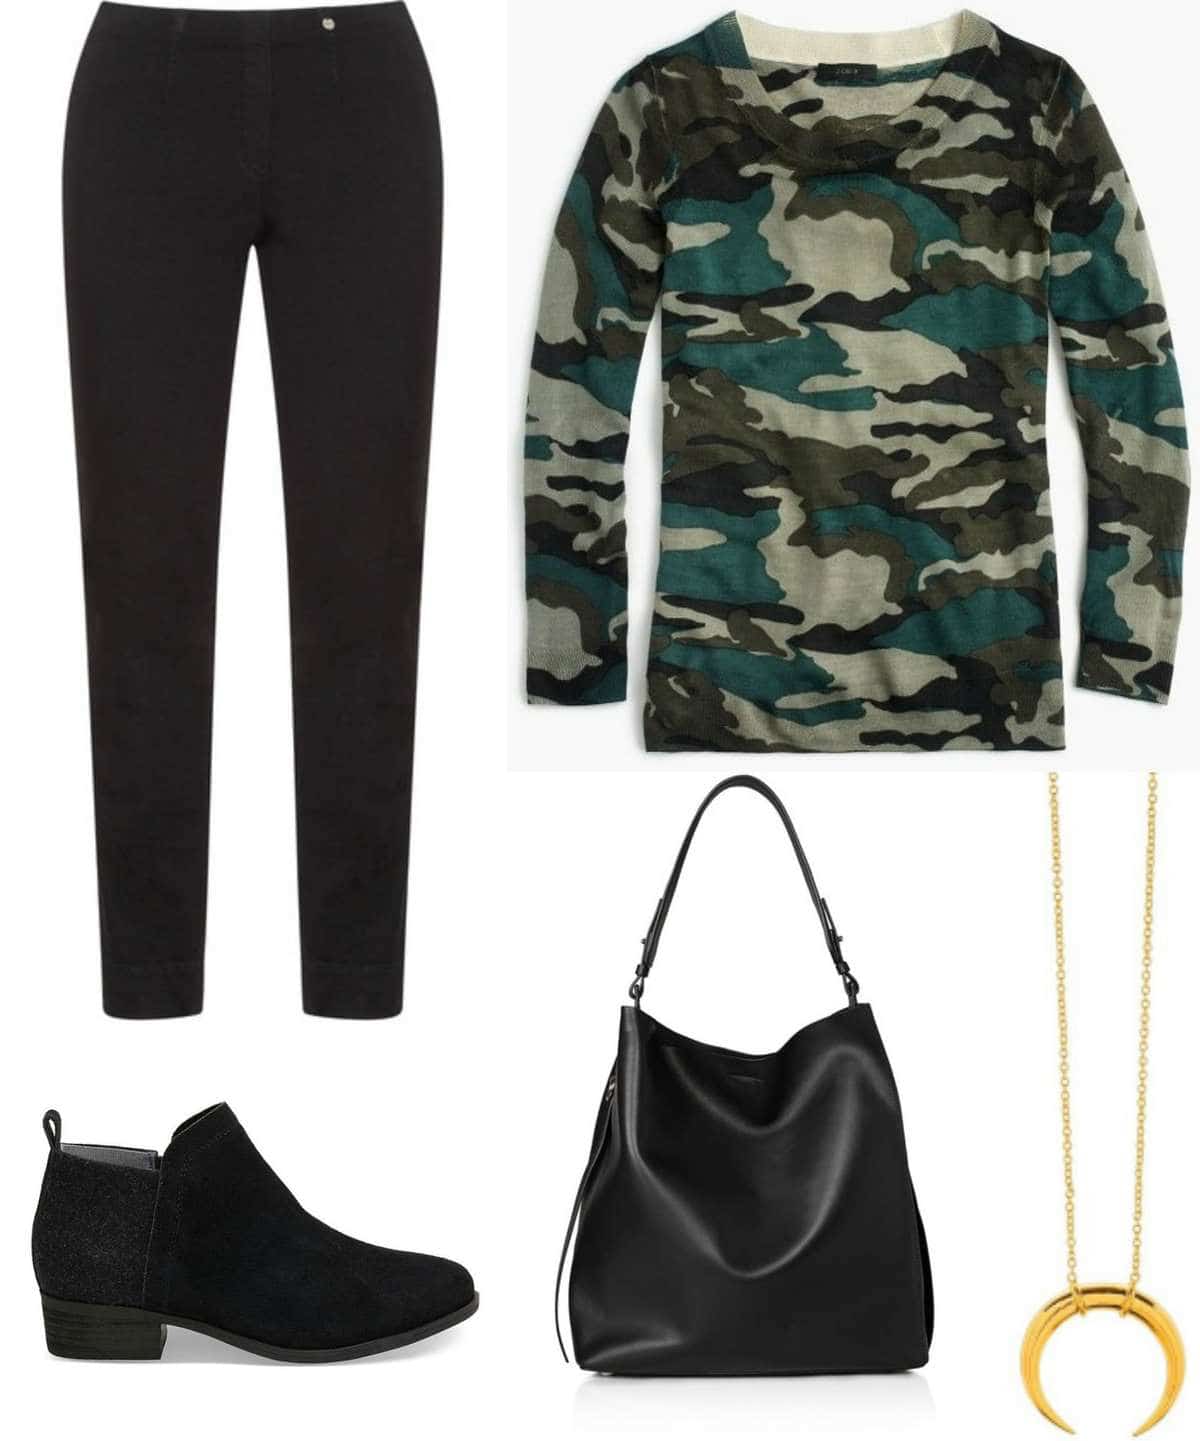 Camo is a hot trend for this season; it's chic and polished in refined merino wool.